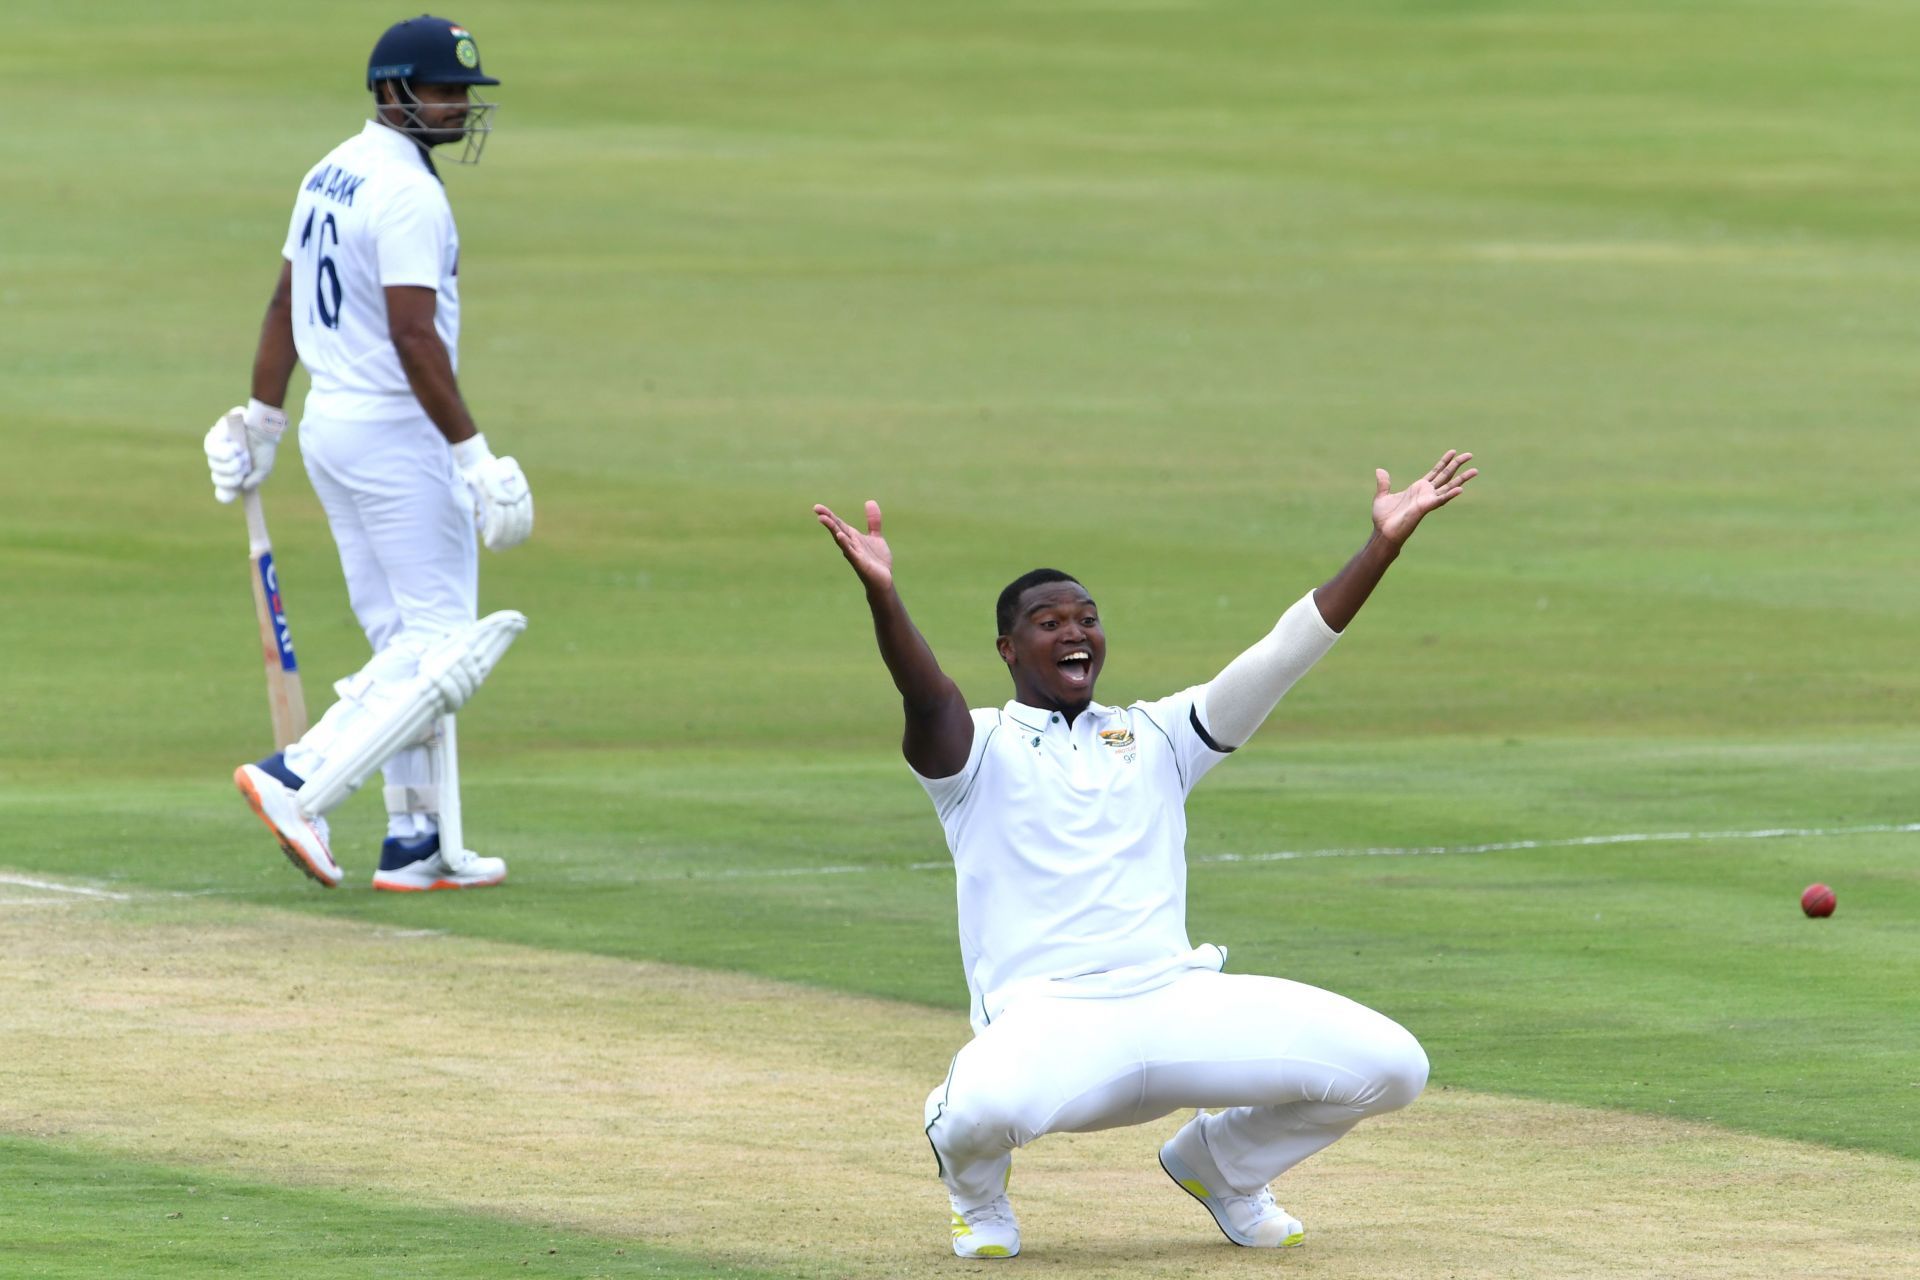 Lungi Ngidi appeals for the wicket of Mayank Agarwal. Pic: Getty Images